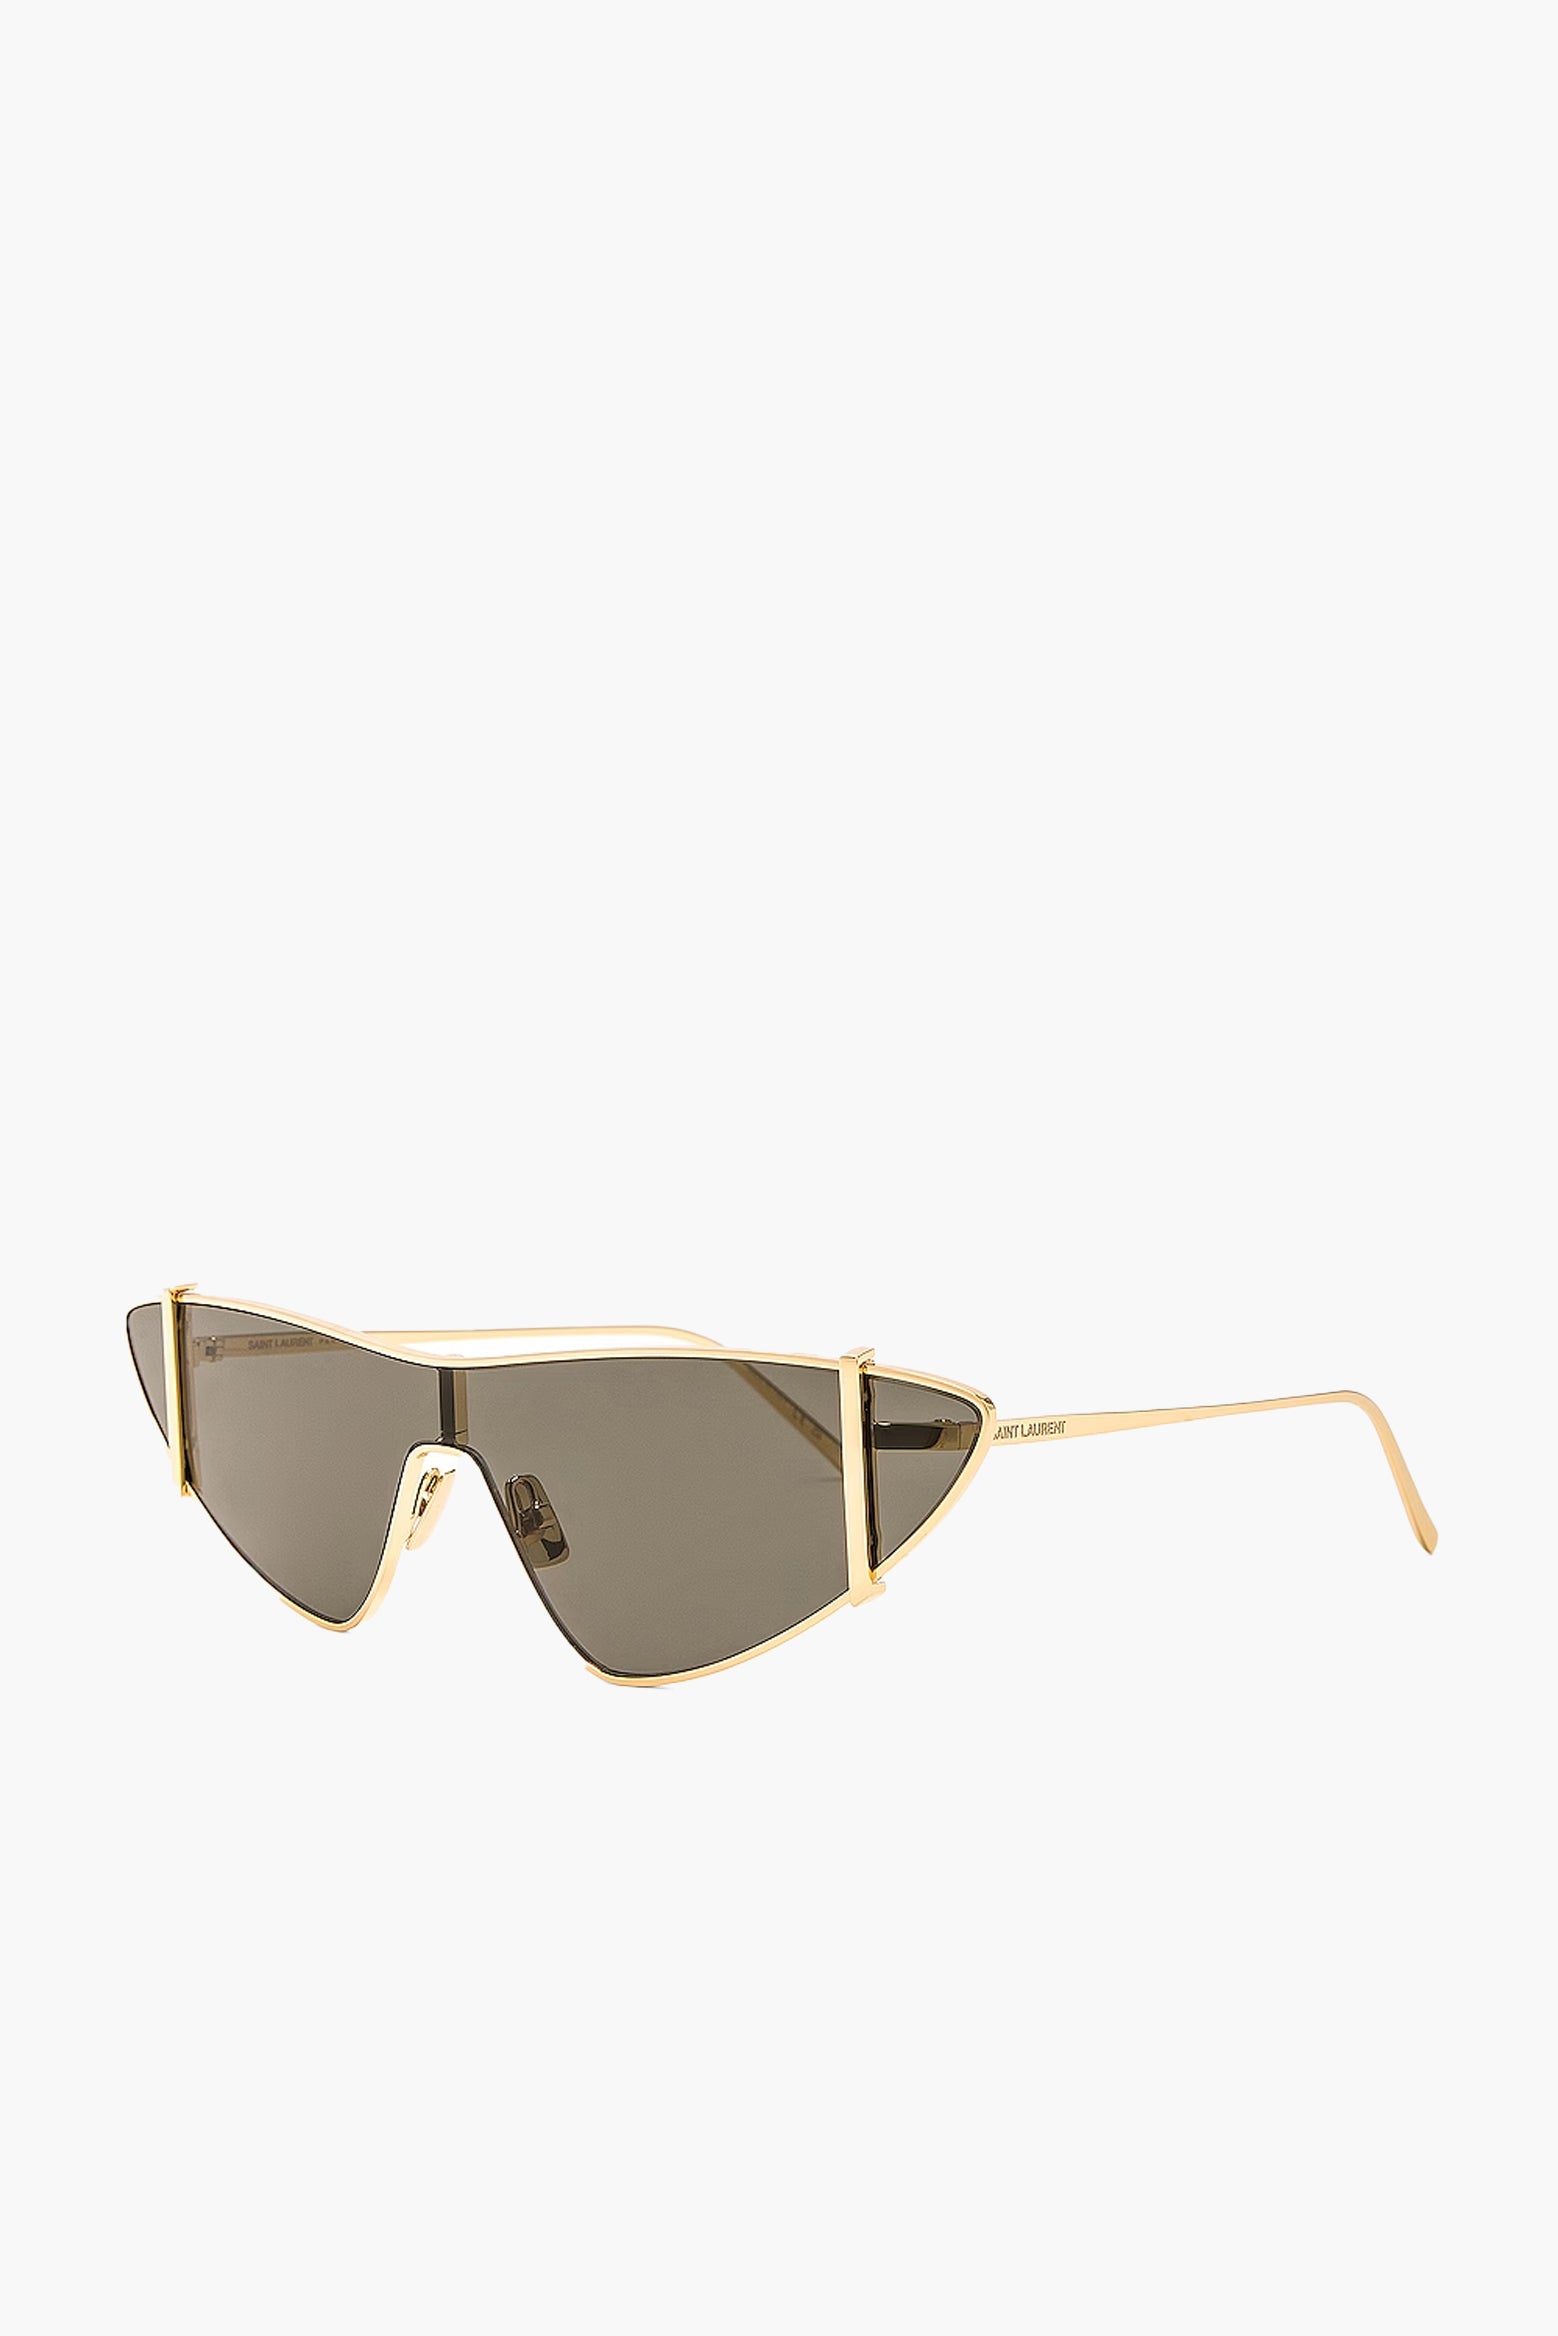 Saint Laurent Metal Cat Eye Sunglasses in Gold available at The New Trend Australia.